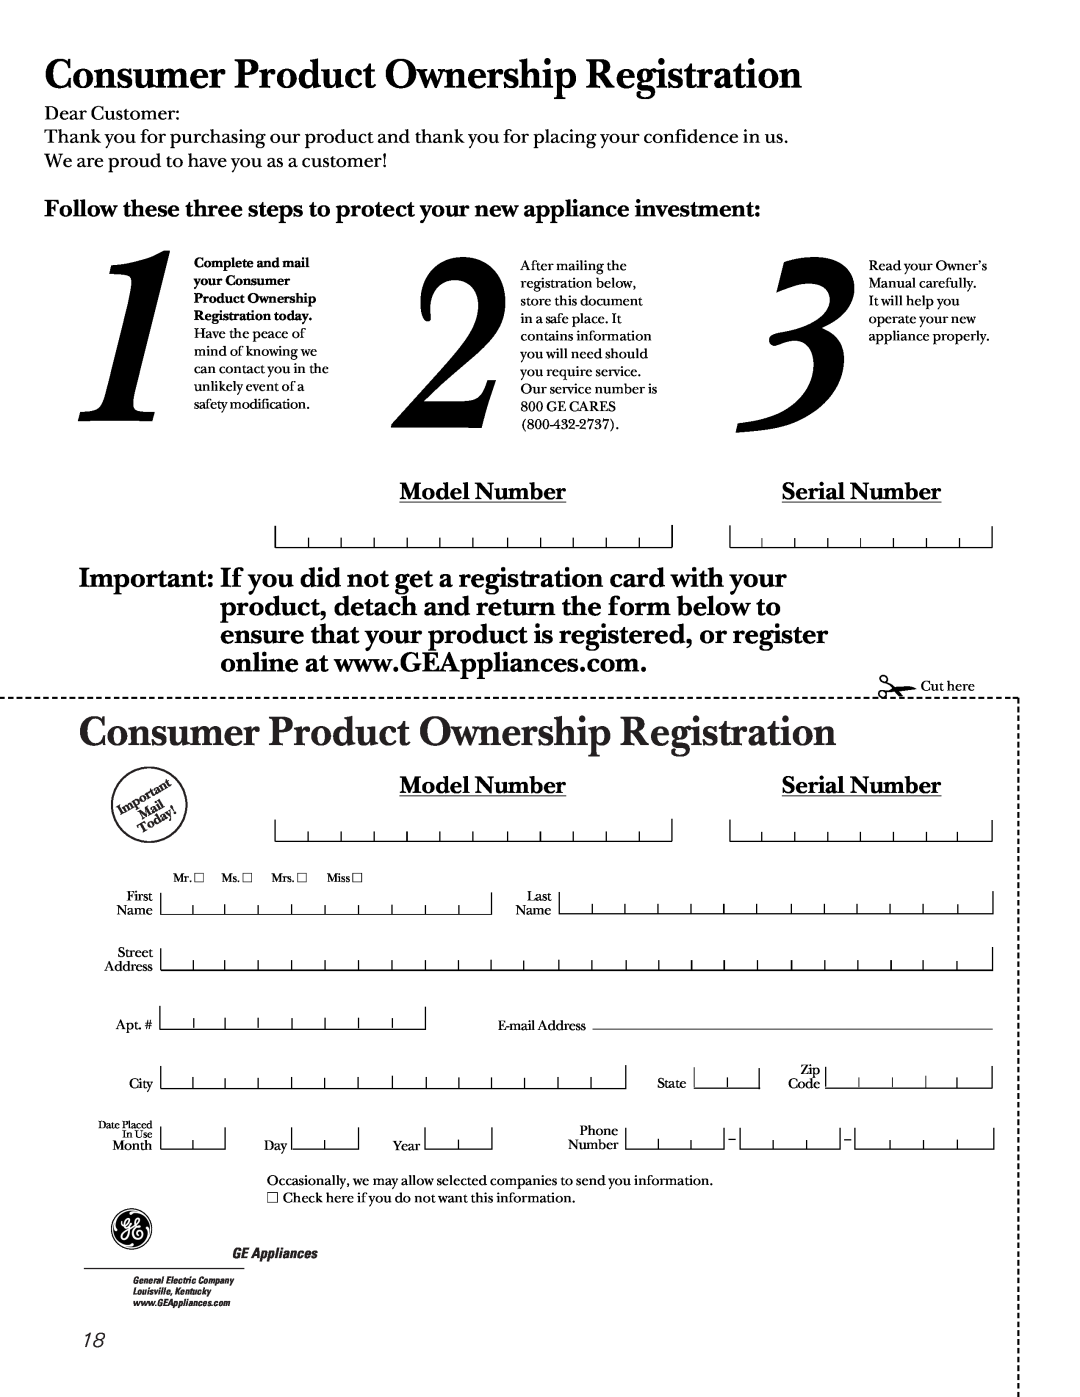 GE ASP05, AST06 installation instructions Model Number, Serial Number, Consumer Product Ownership Registration 